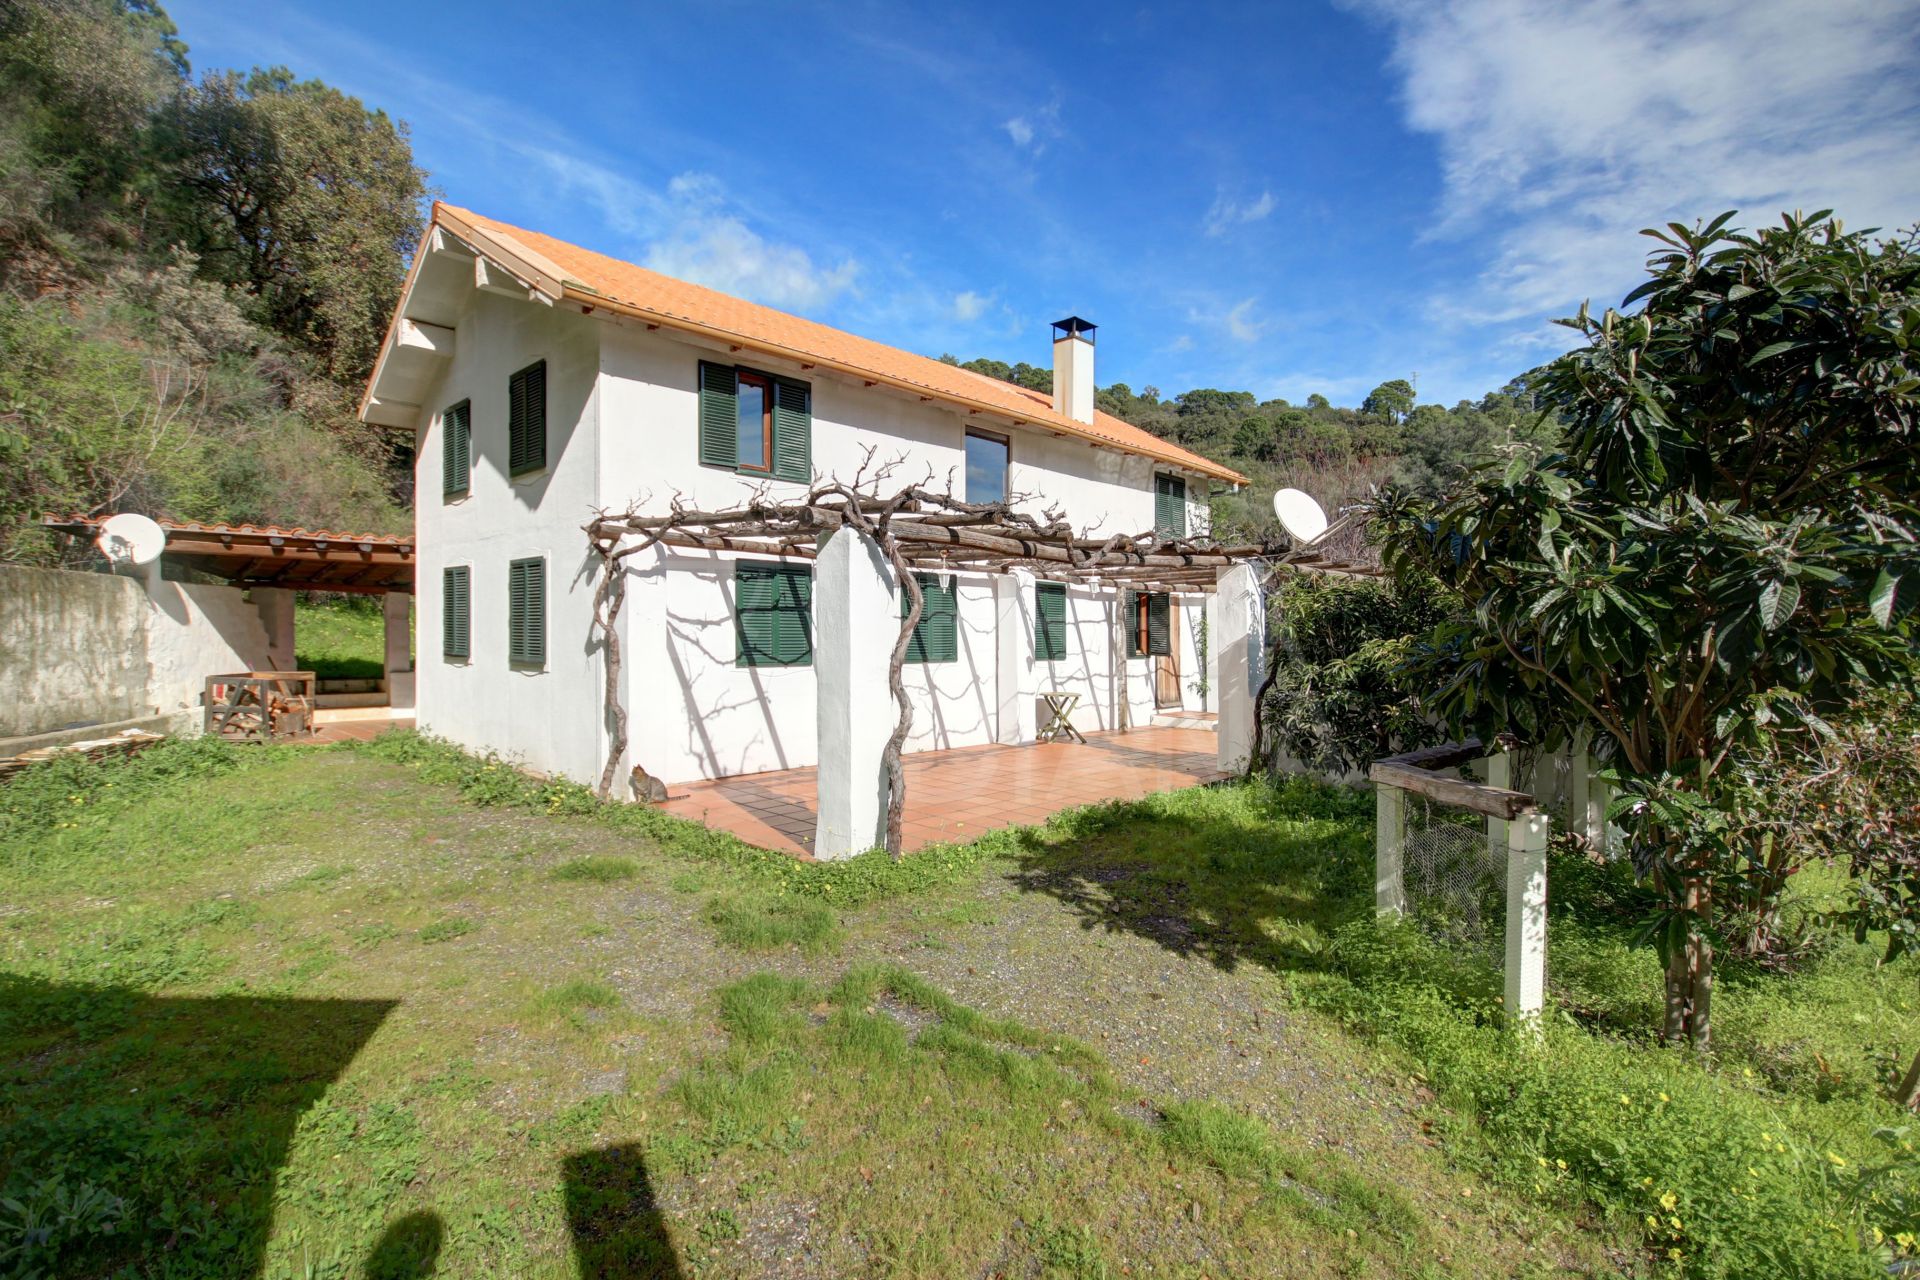 Country estate on the riverside with 2 houses on a sprawling plot for sale in El Padron, Estepona